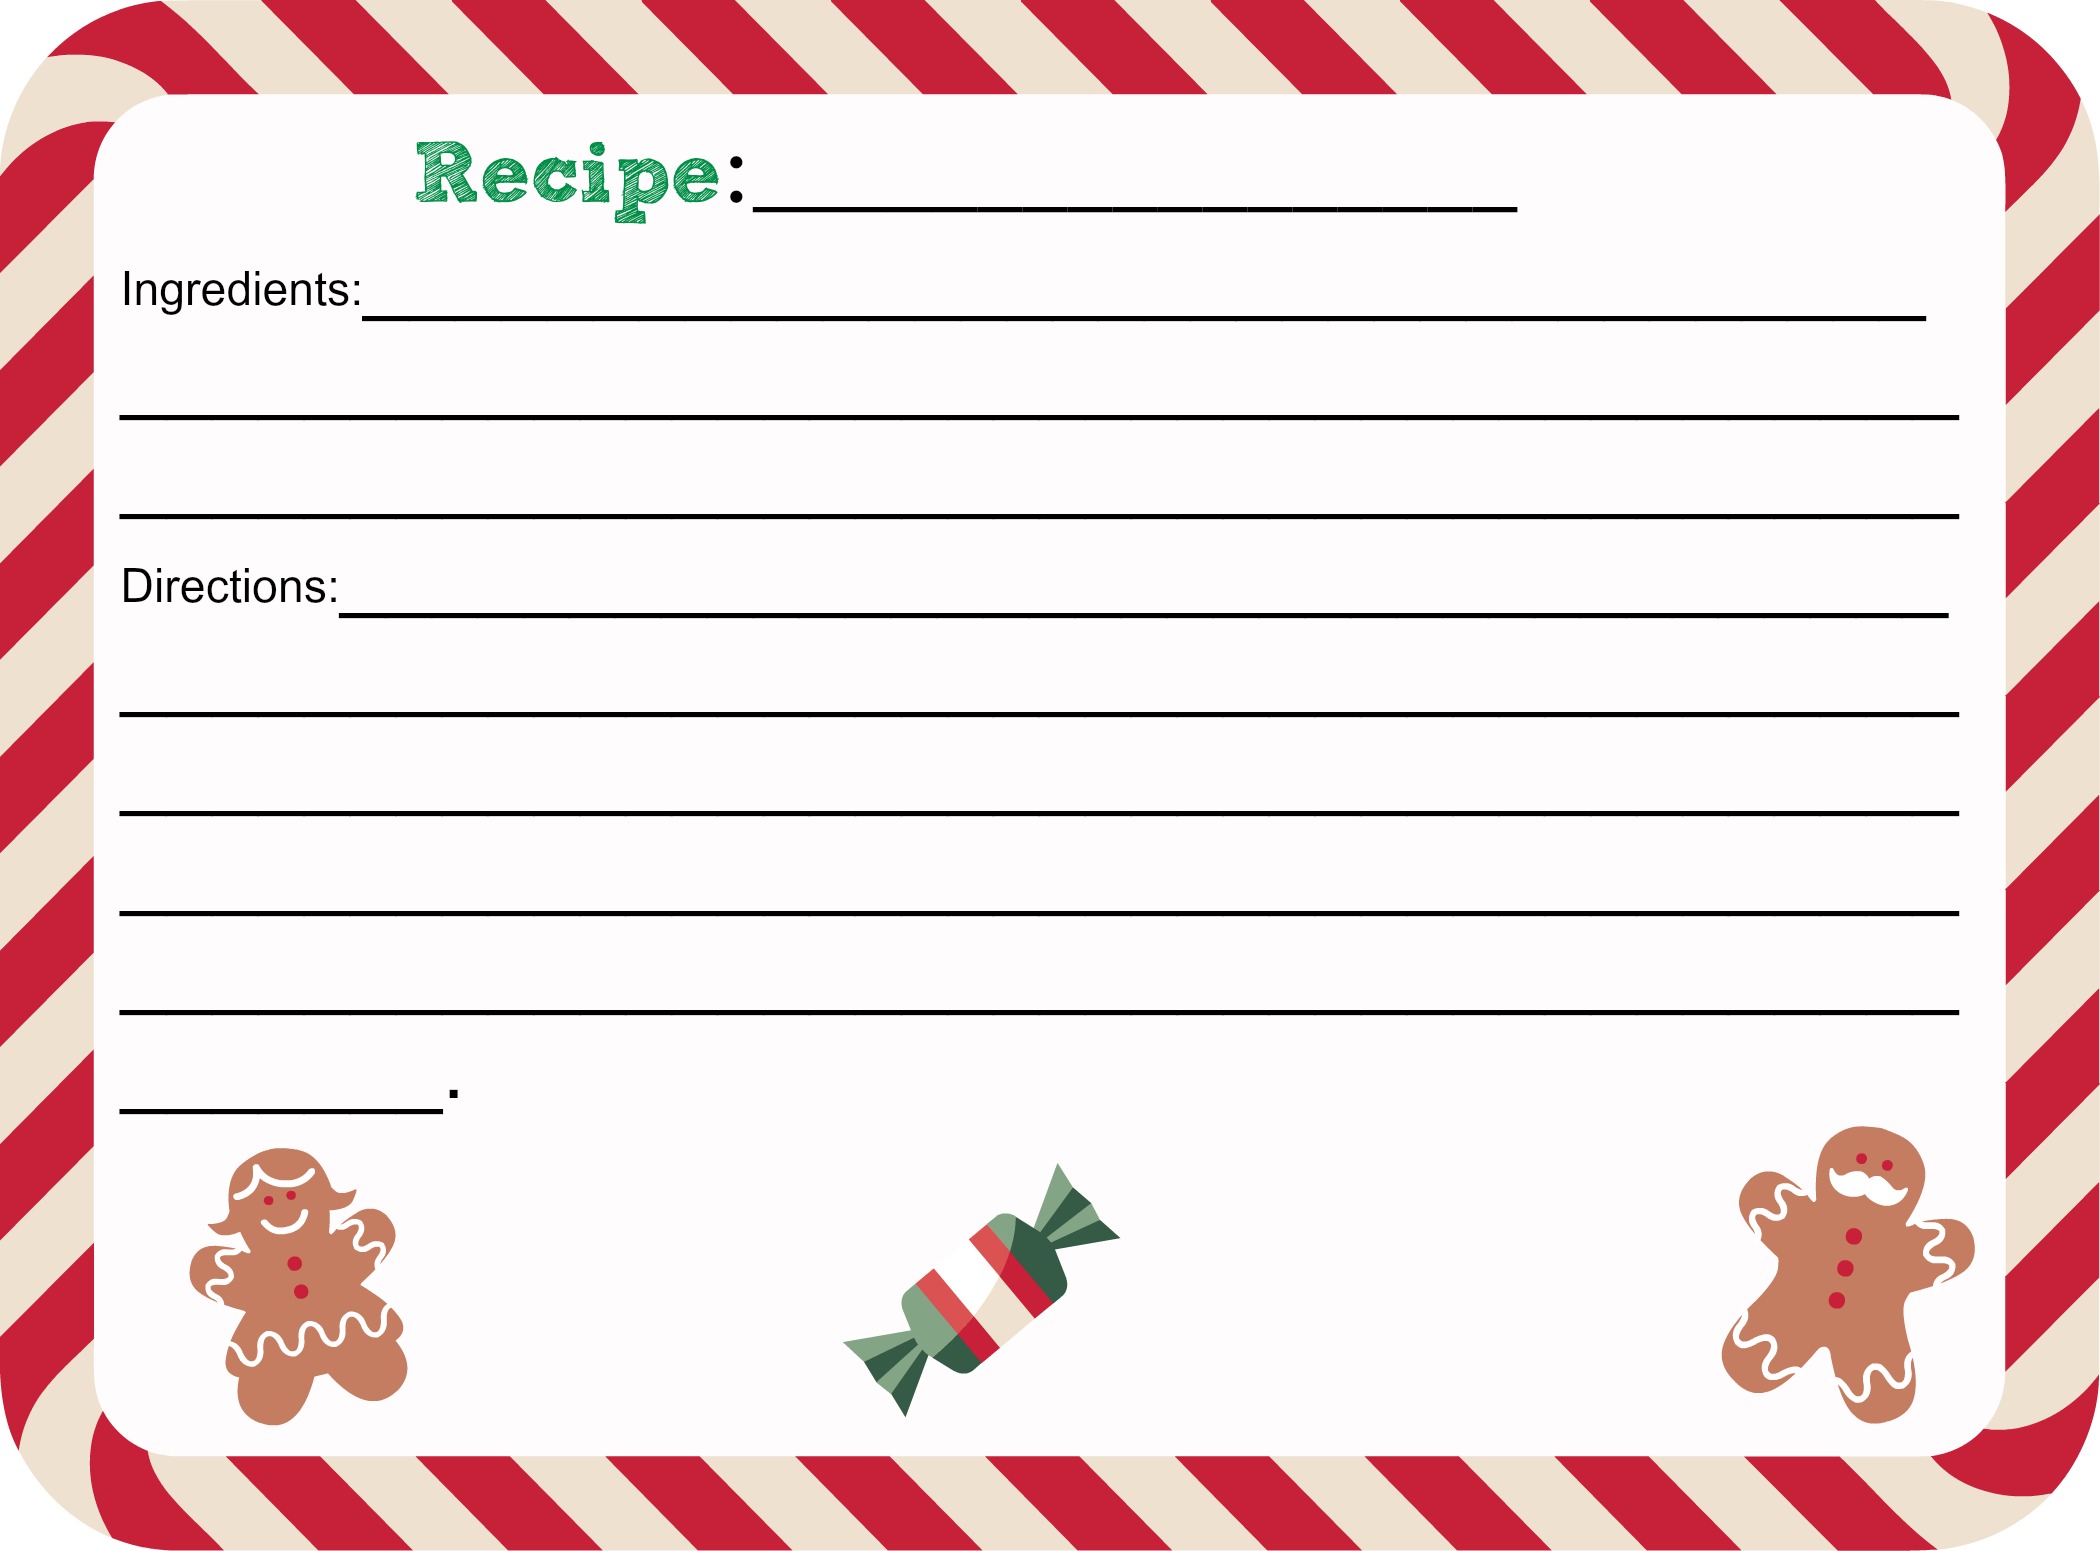 8 Best Images of Free Printable Cute Recipe Card Template Free